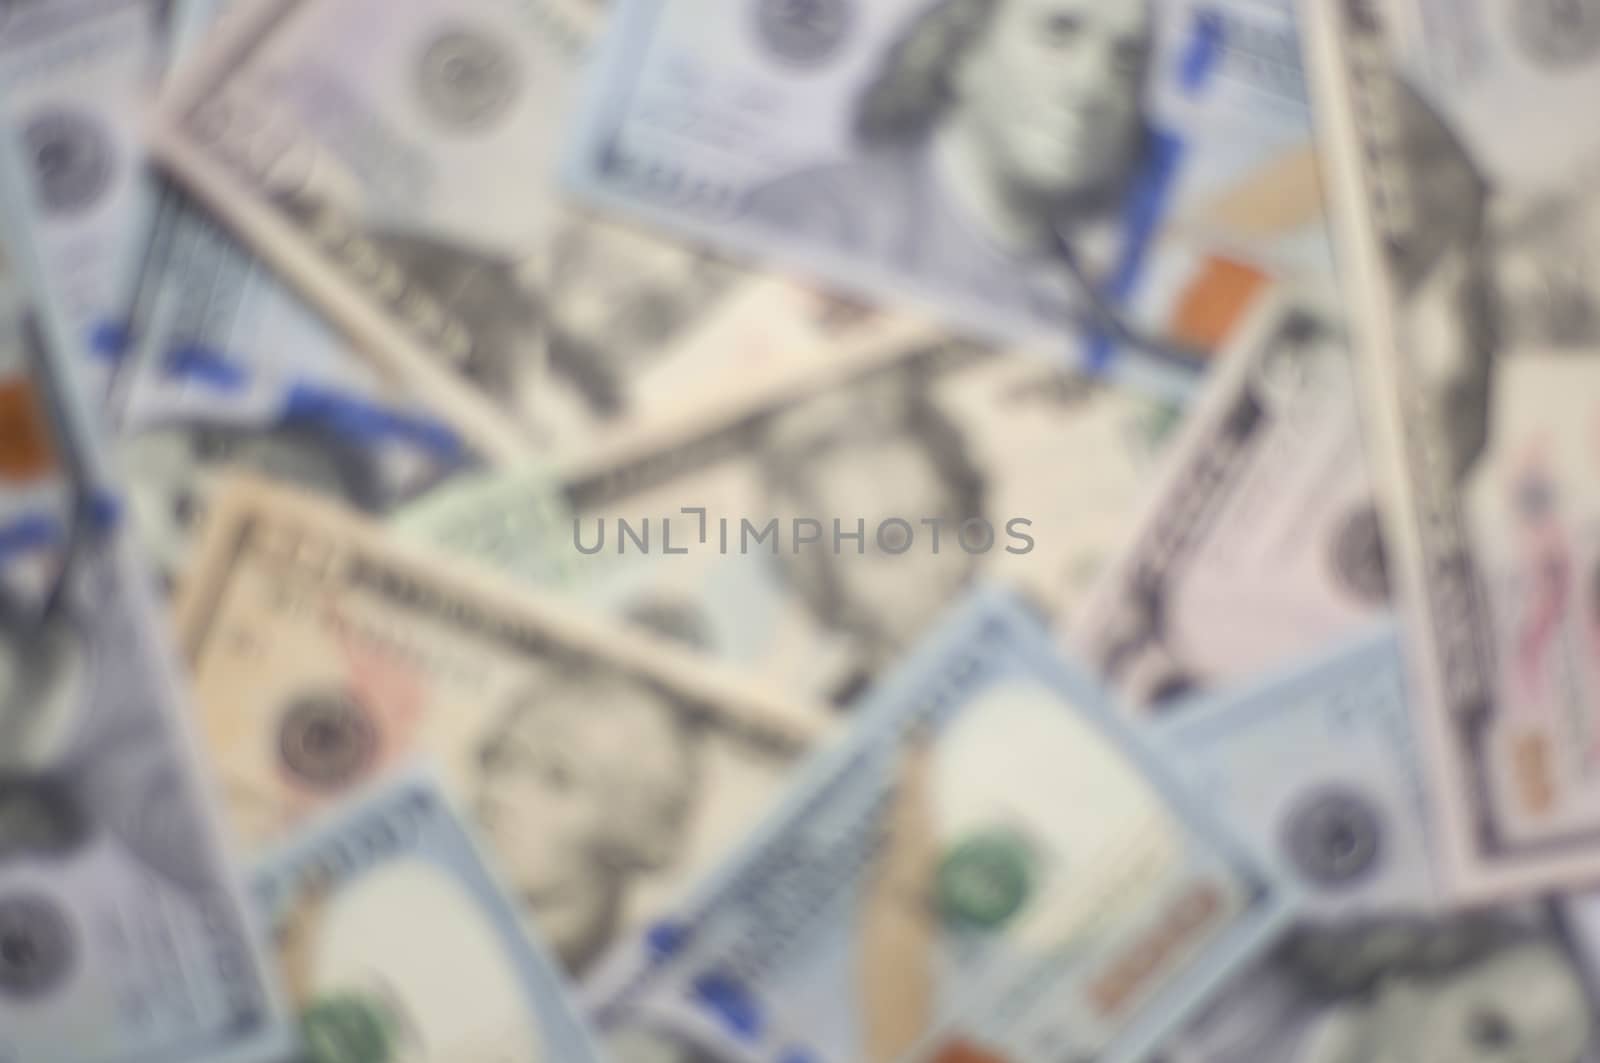 Blurred background made of various dollar bills